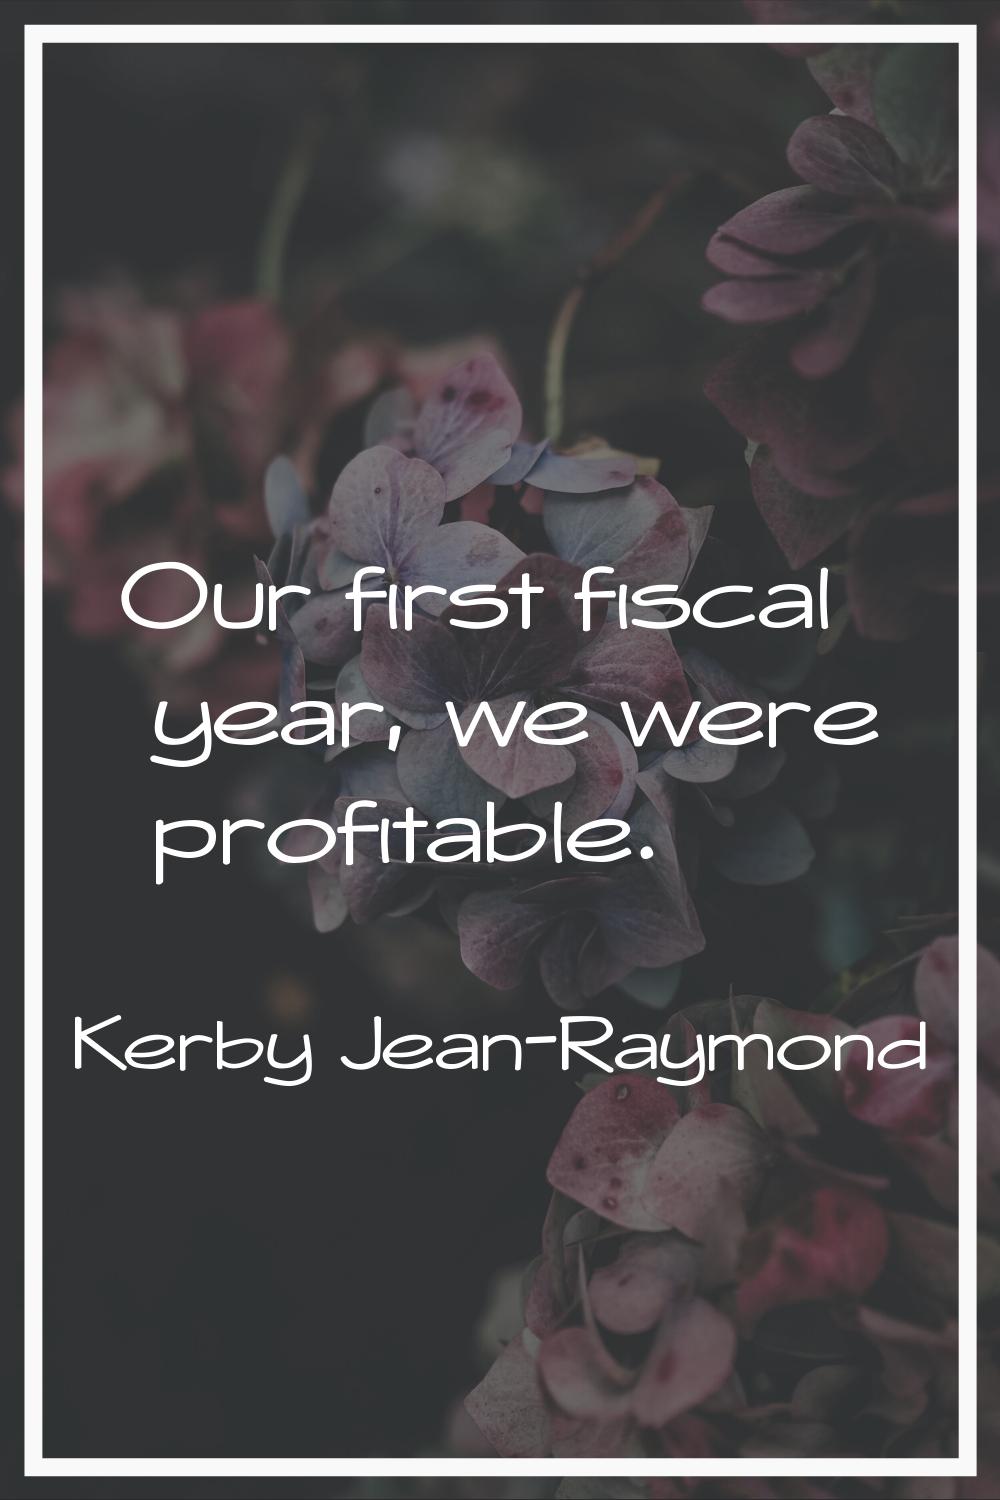 Our first fiscal year, we were profitable.